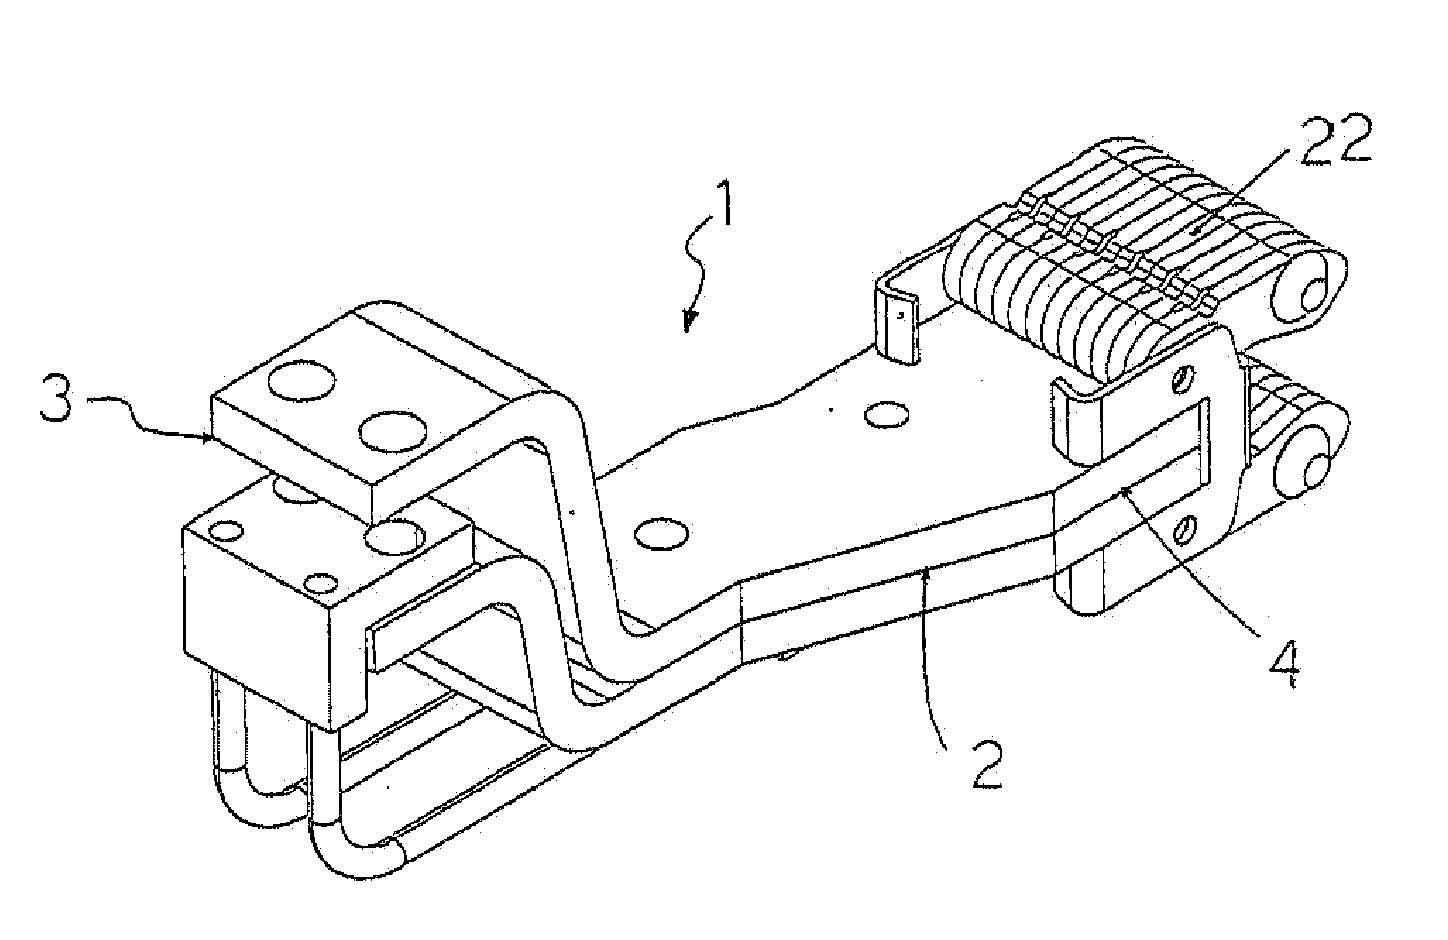 Device For Connecting An Electric Line To A Circuit Breaker